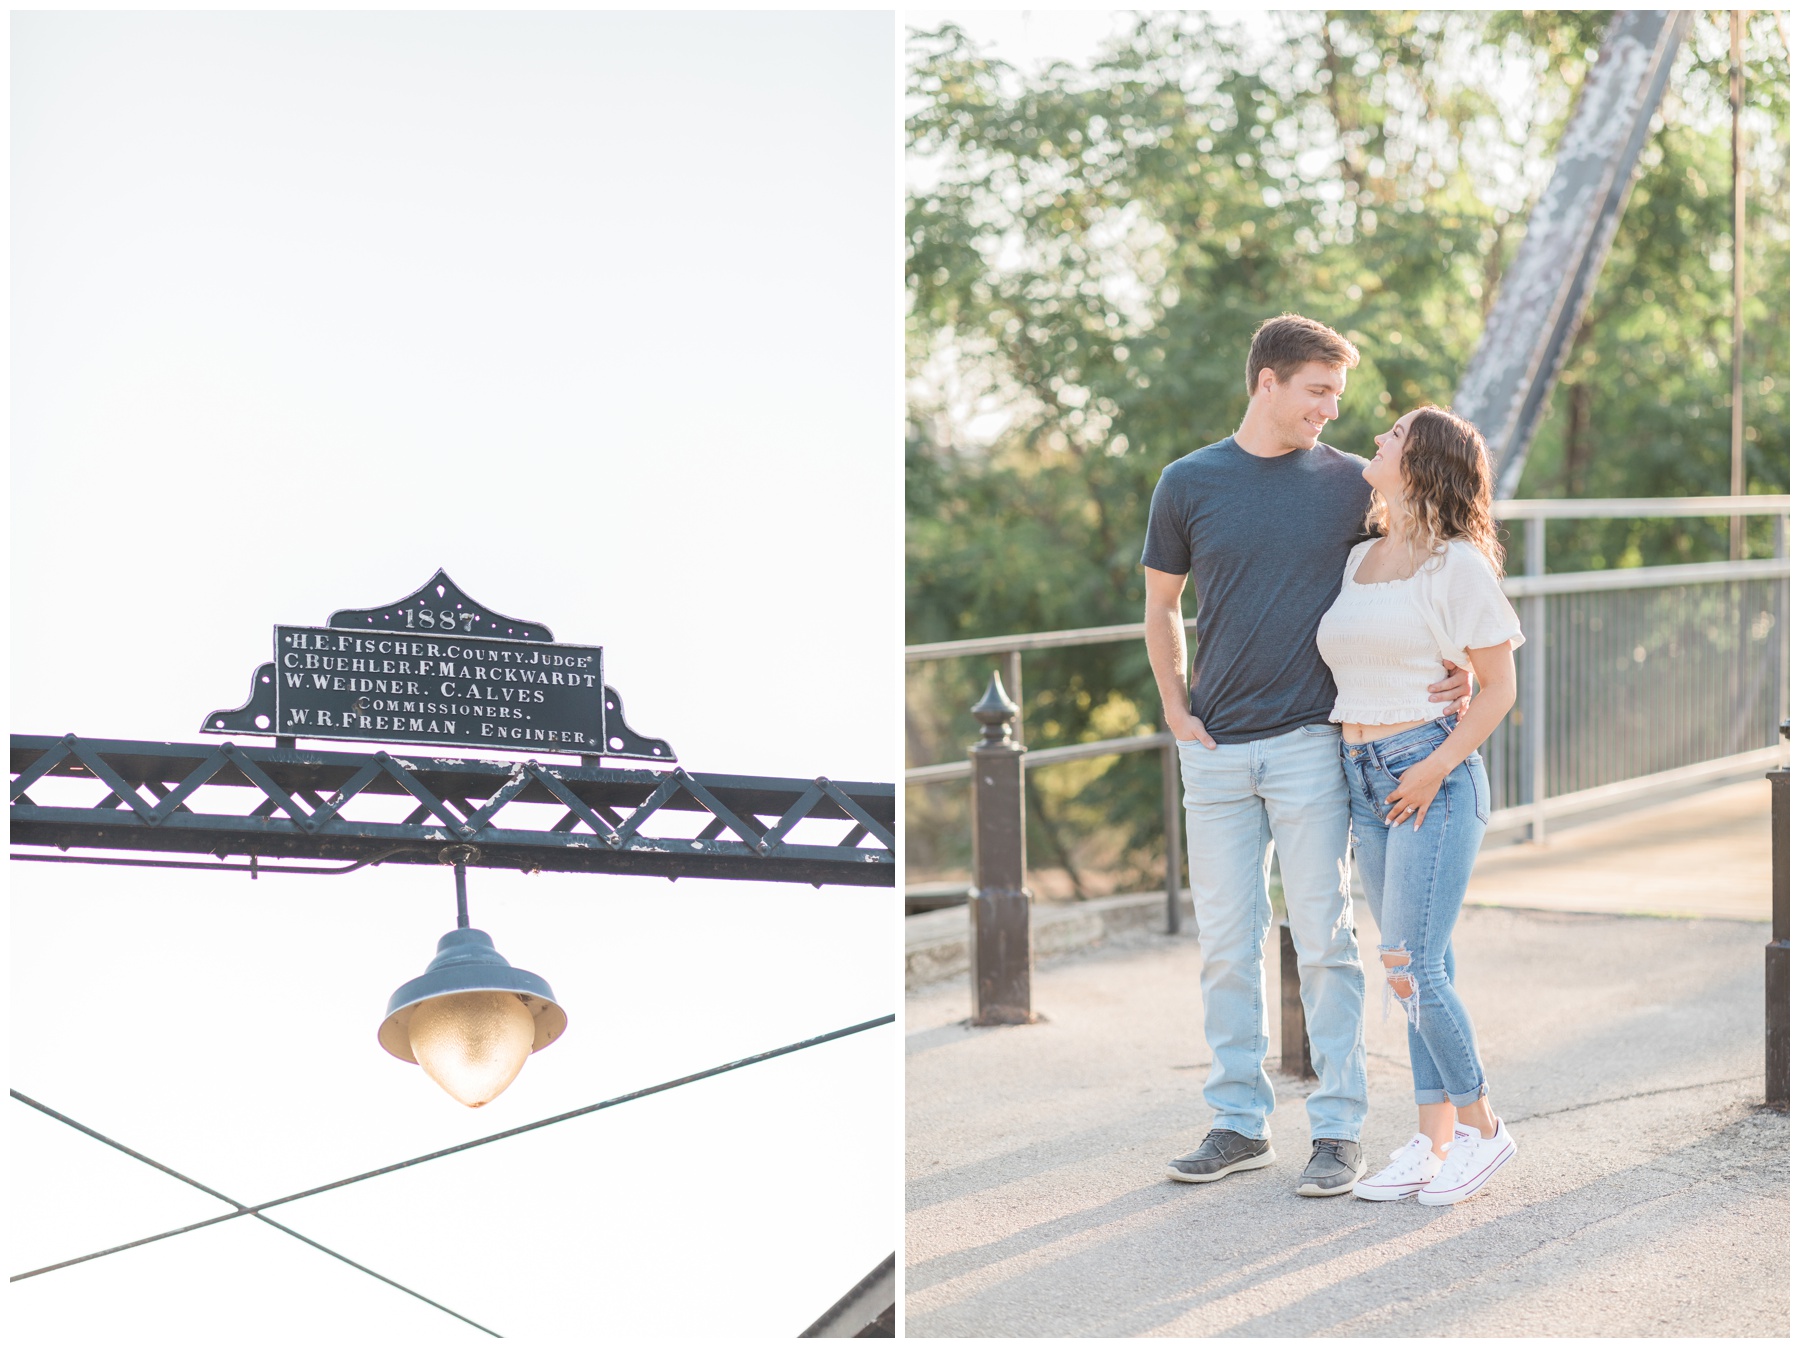 Engagement session at Faust Street Bridge in New Braunfels, Texas